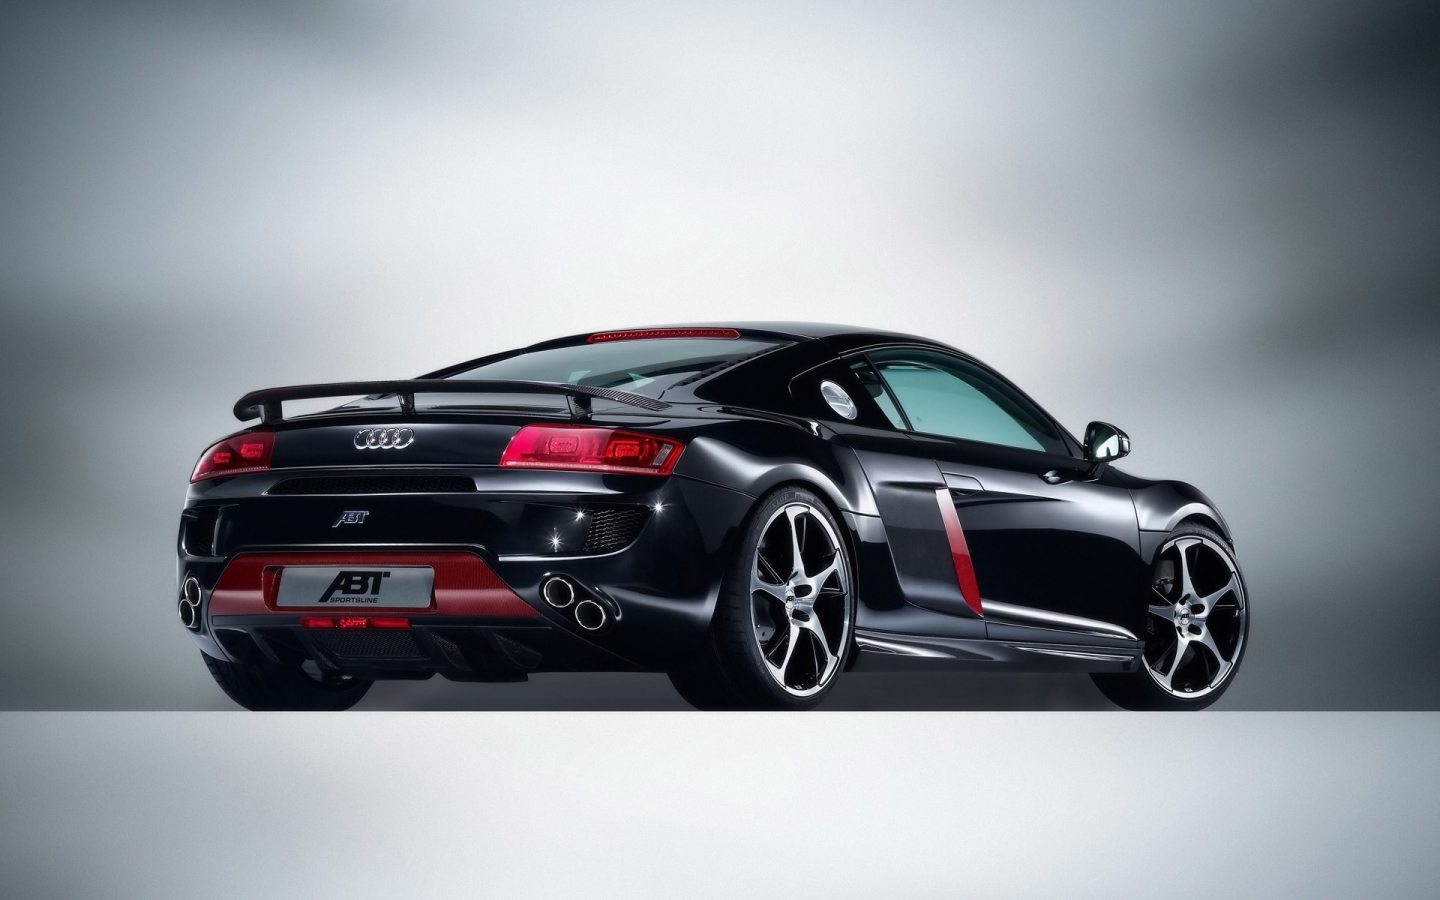 2008 Abt Audi R8 - Rear Angle for 1440 x 900 widescreen resolution